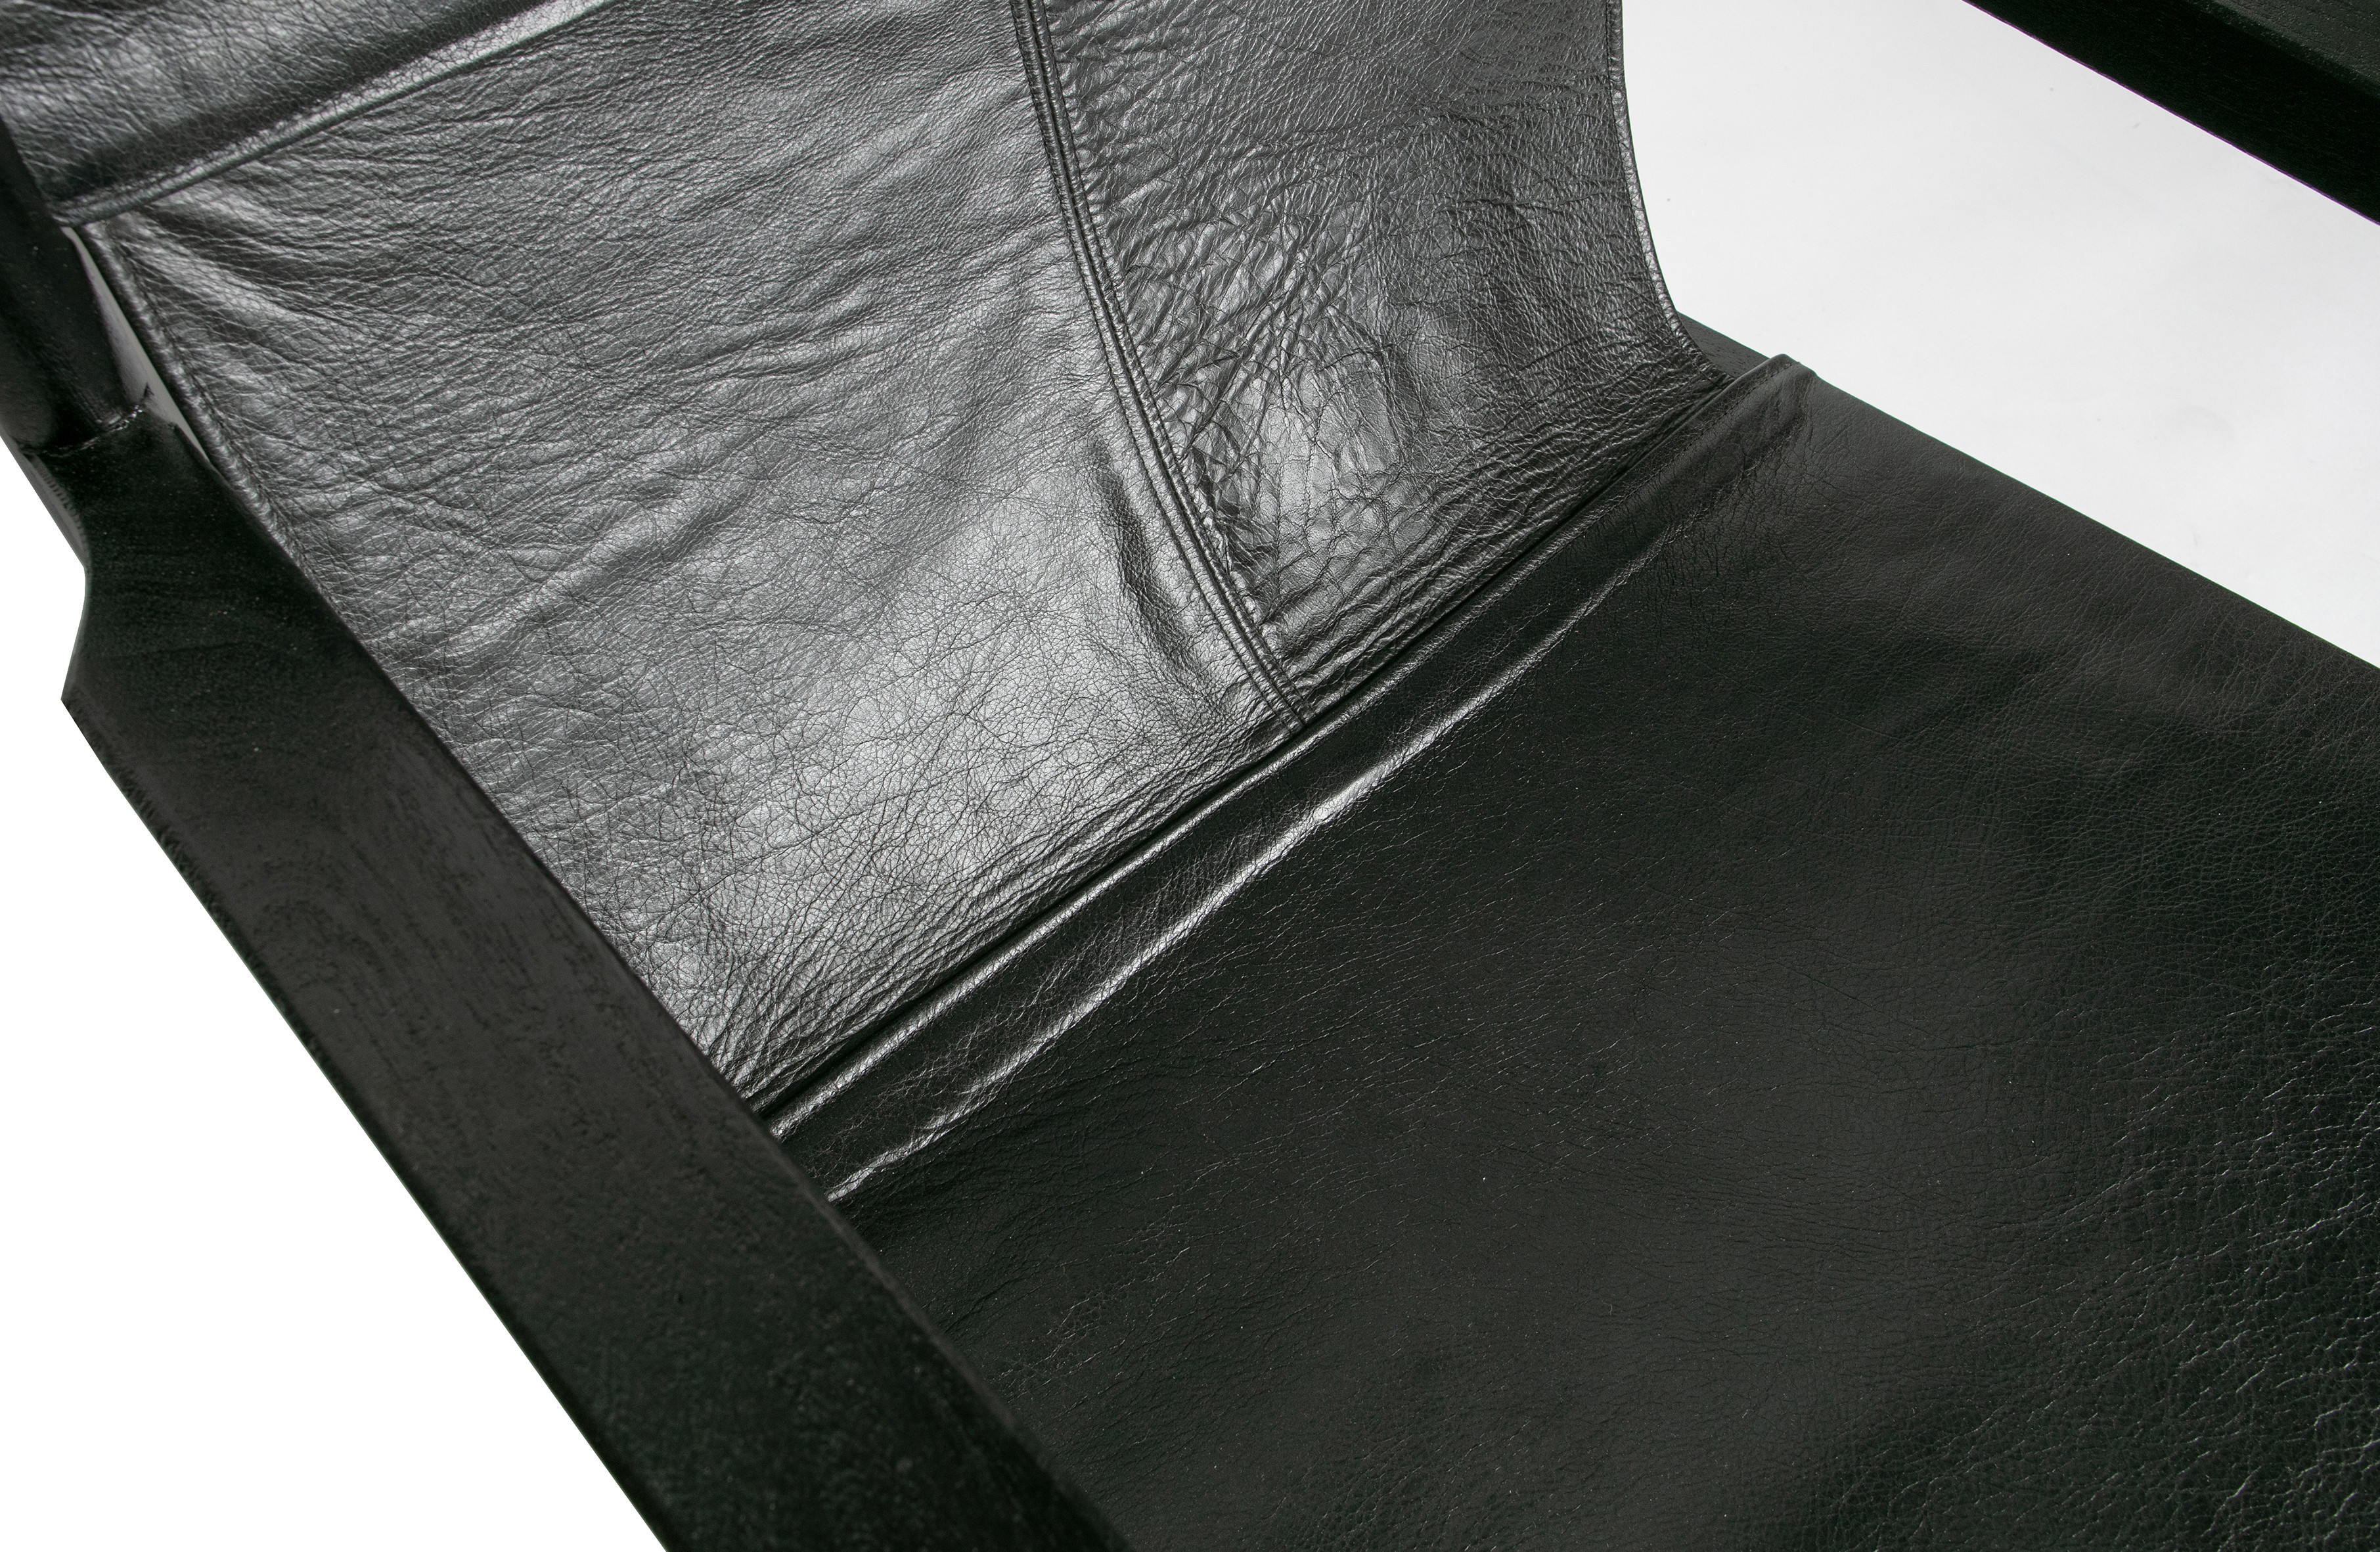 Rent a Armchair Chill leather brown? Rent at KeyPro furniture rental!